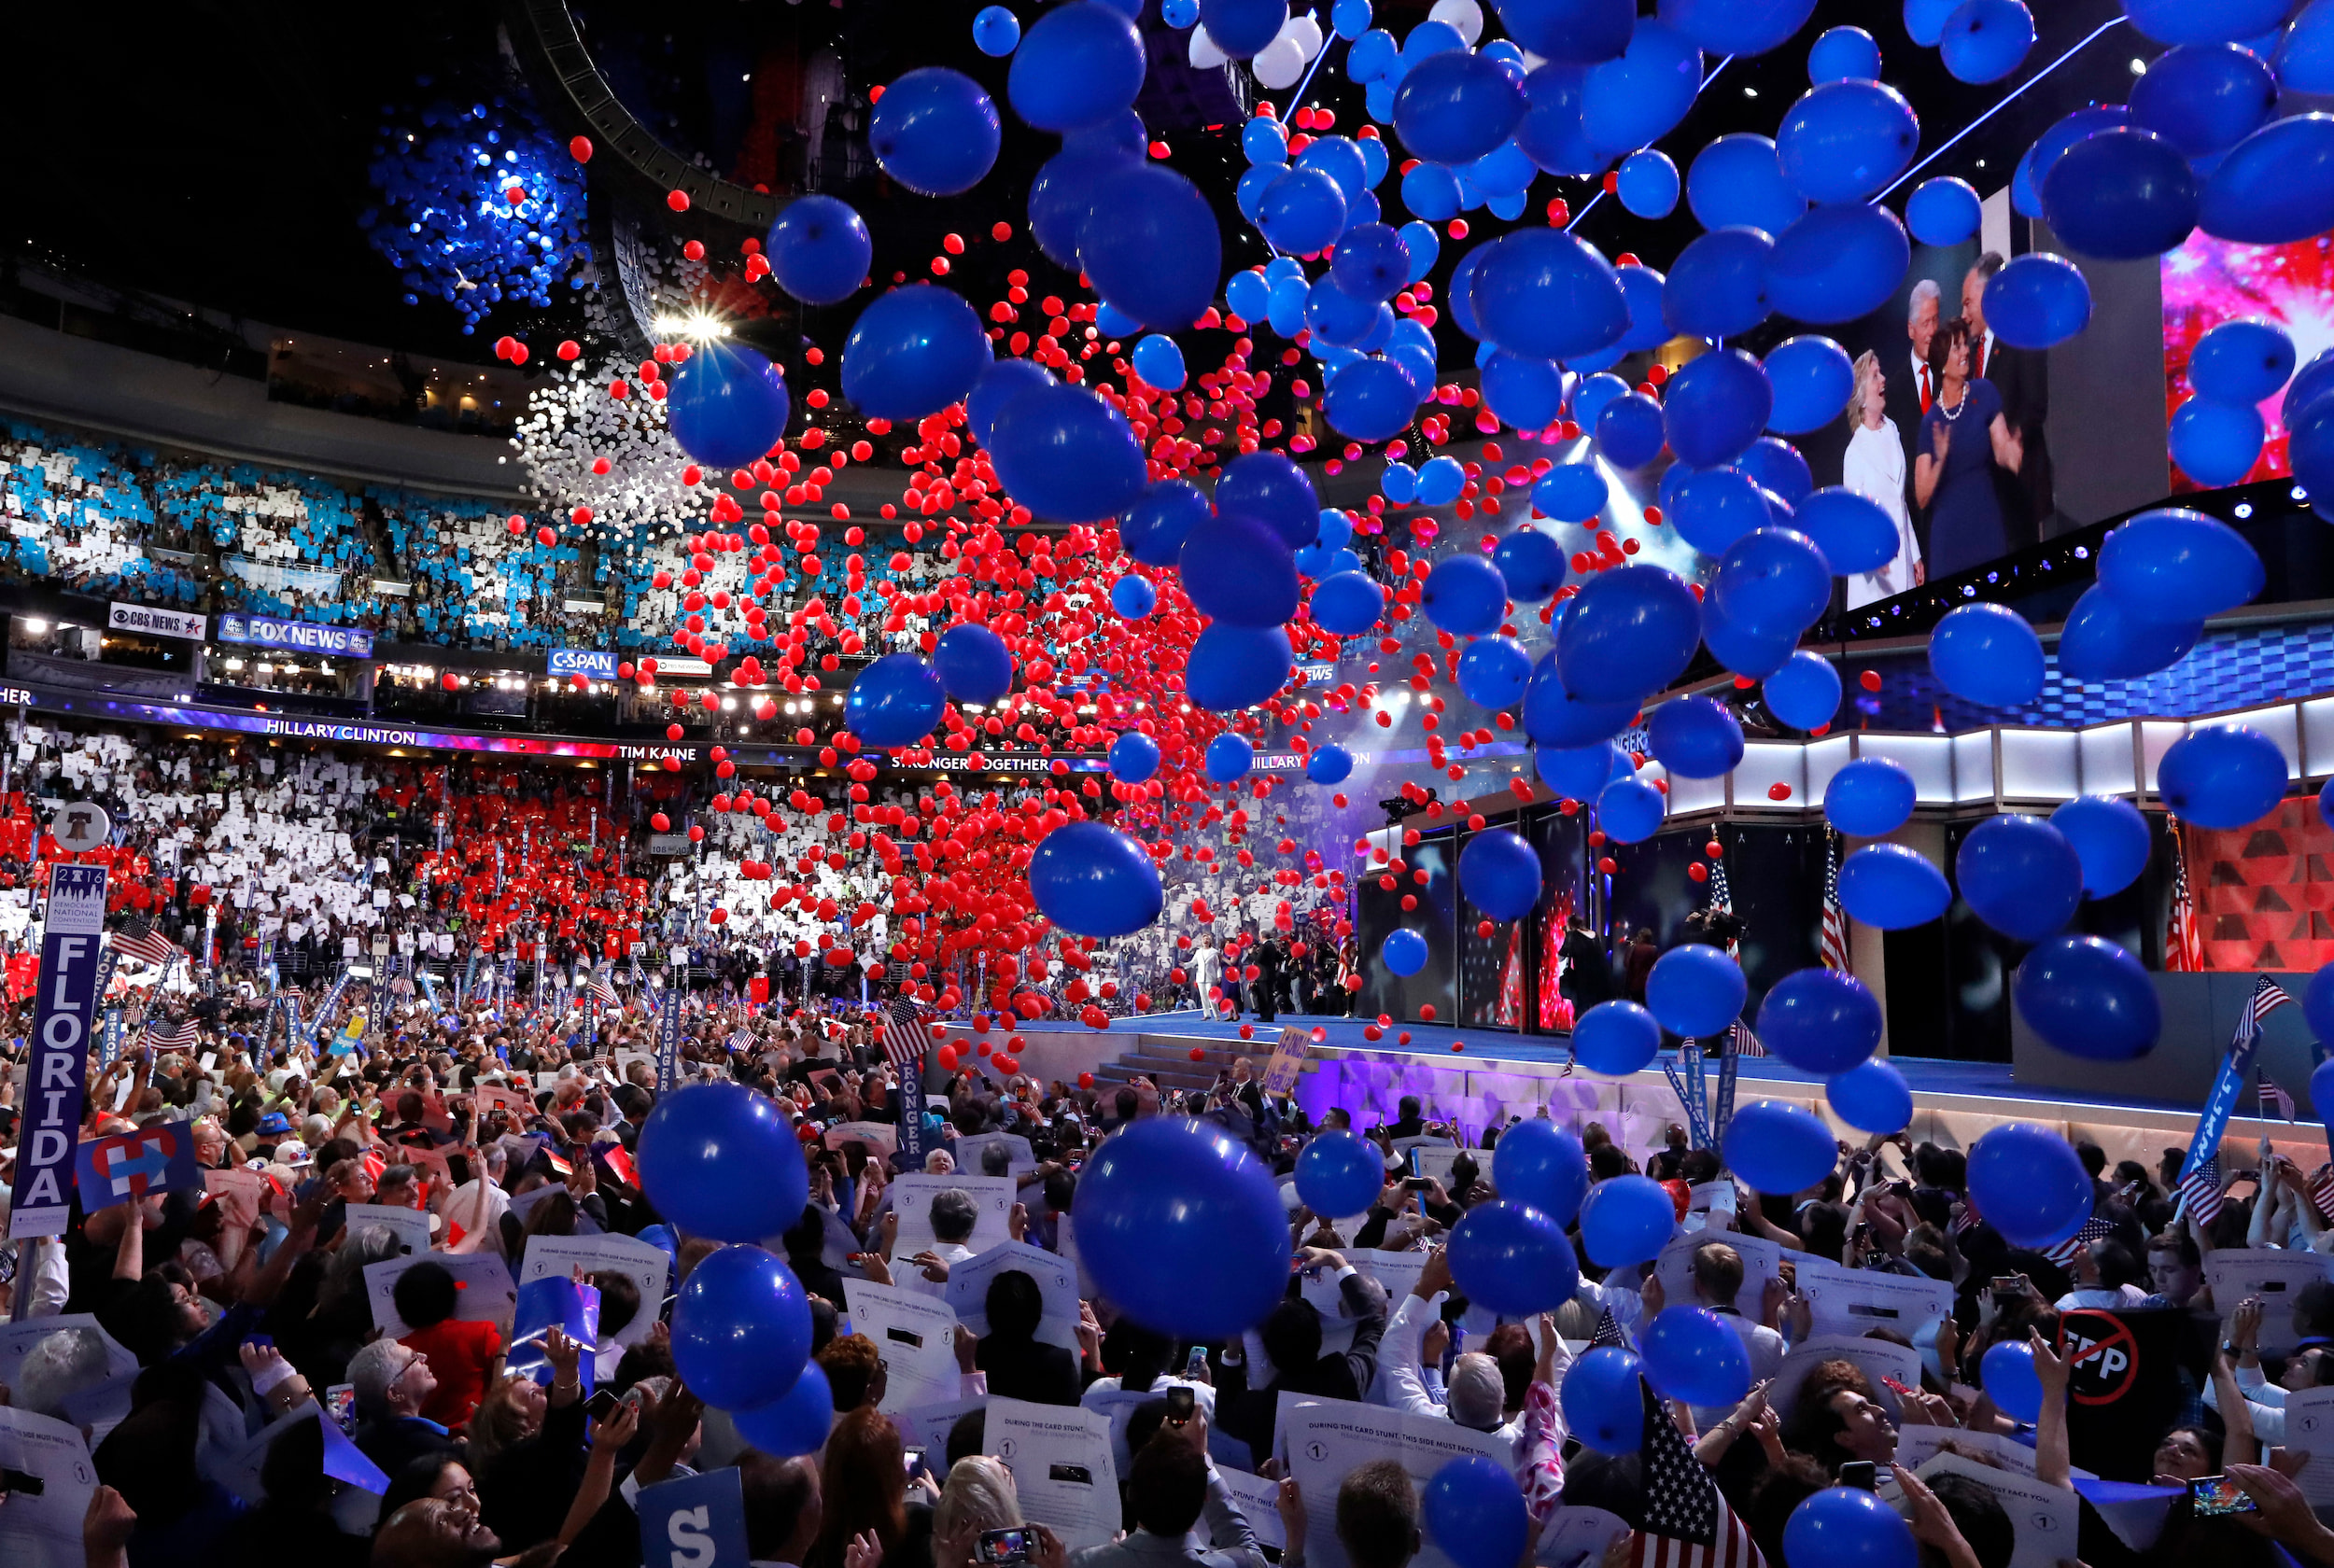 Balloons descend from the ceiling of a large arena onto a crowd of people at the 2016 Democratic National Convention in Philadelphia.